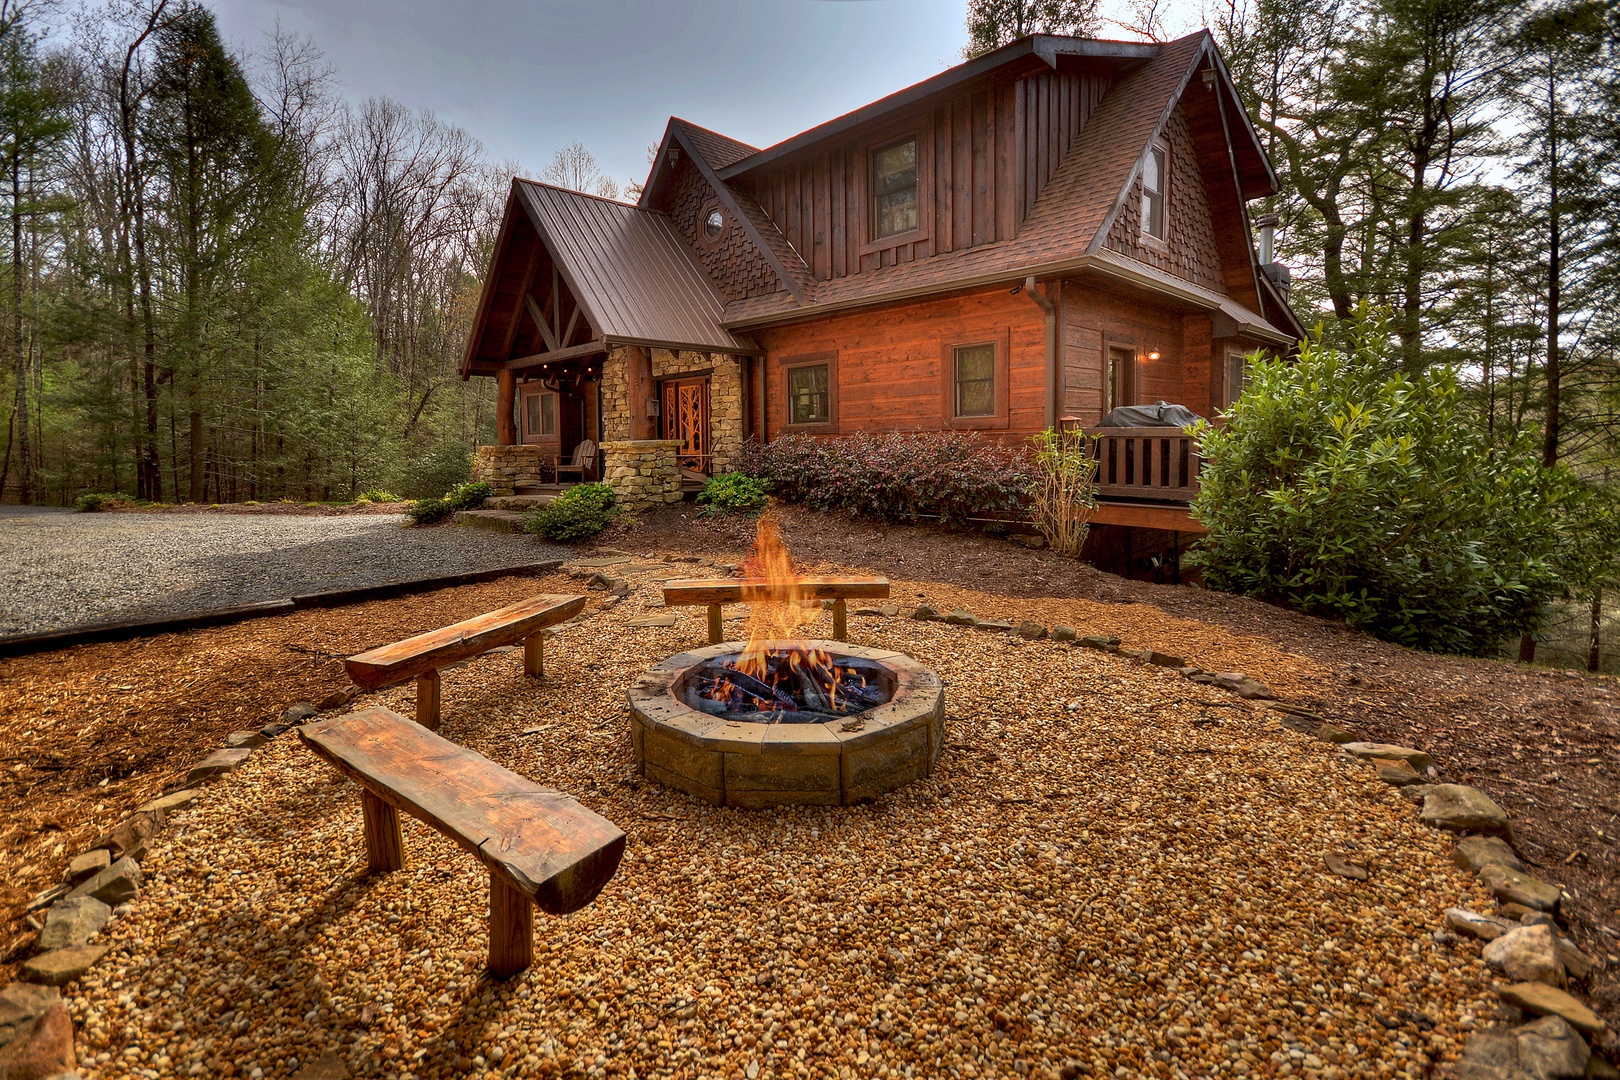 Reel Creek Lodge- Firepit area with outdoor seating and view of the cabin